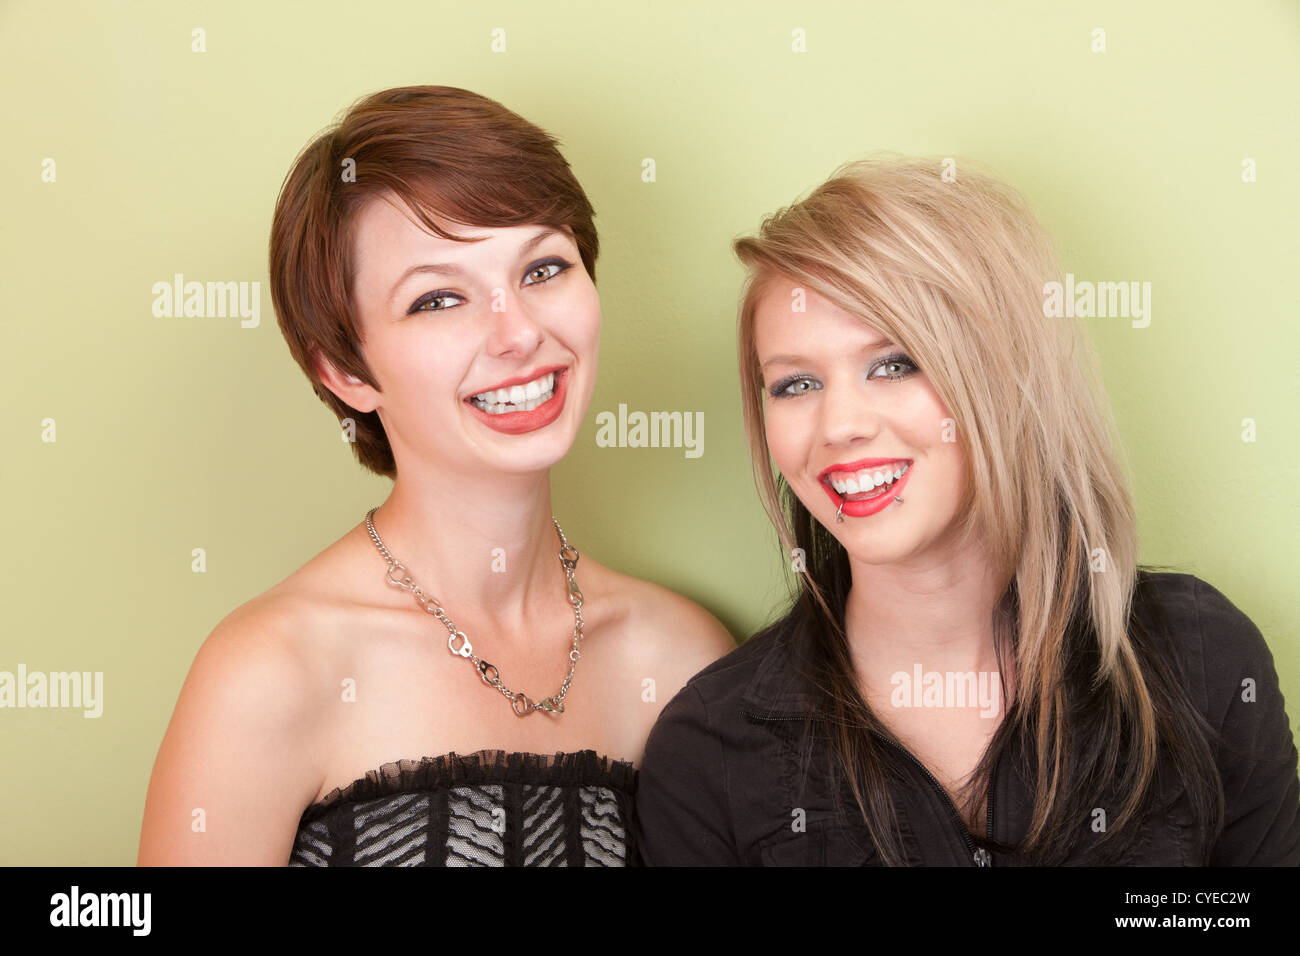 Two young punky looking teens smile in front of a green wall. Stock Photo